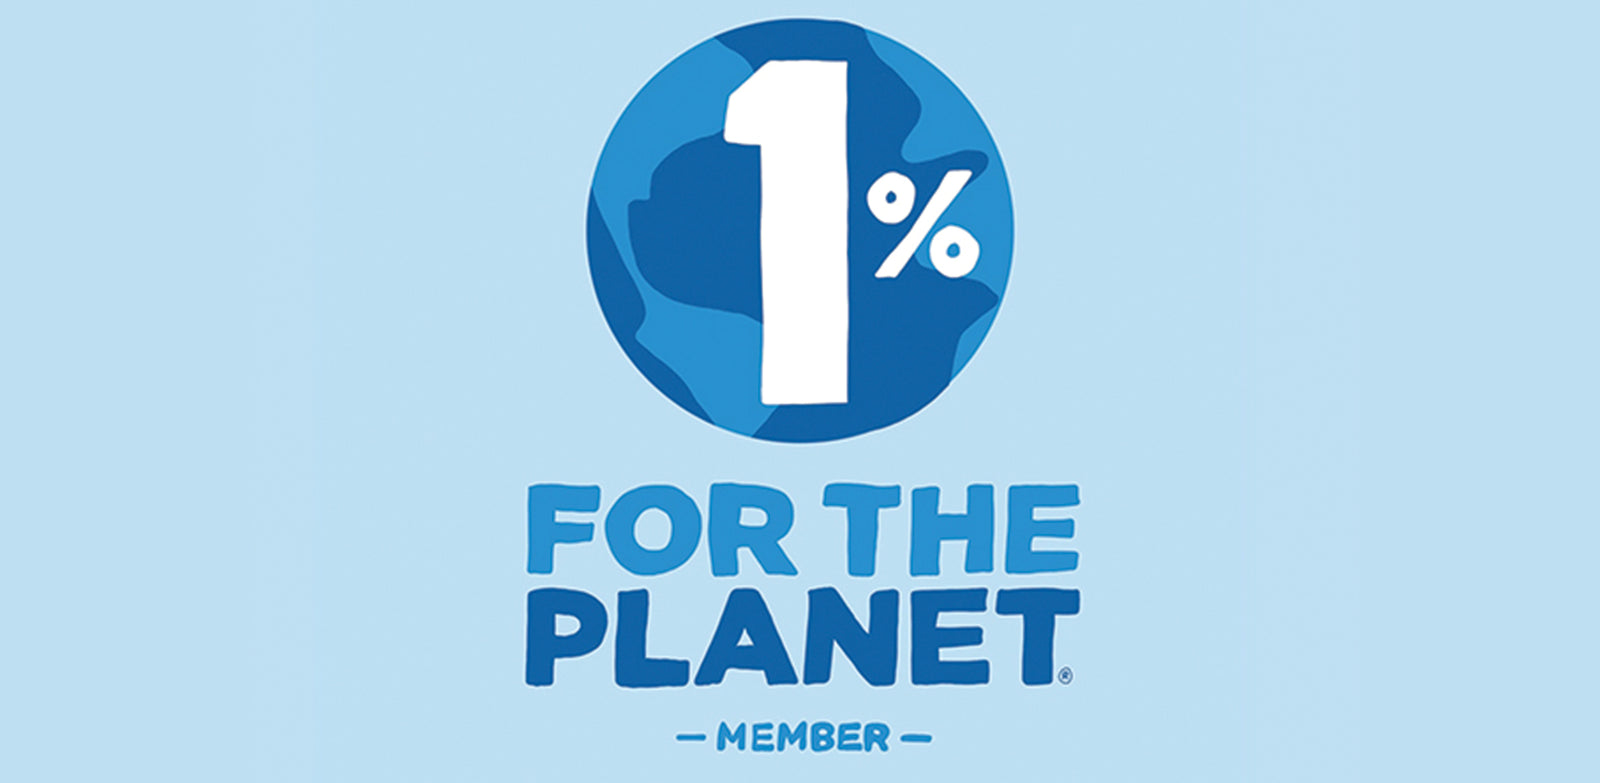 Freshcut Paper is a proud member of 1% for the Planet